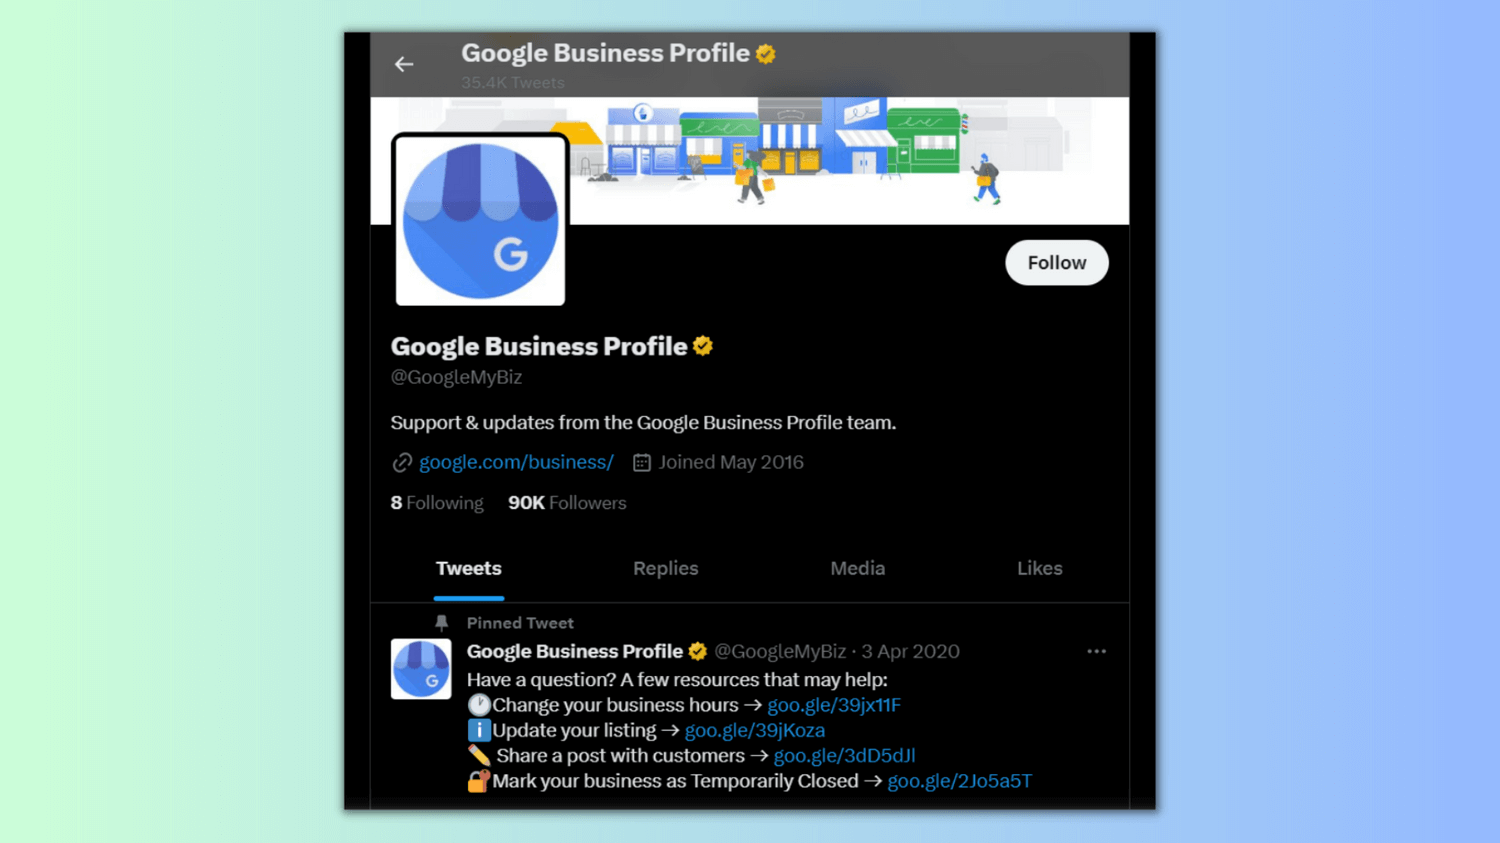 Reach out to the Google Business Profile team on Twitter